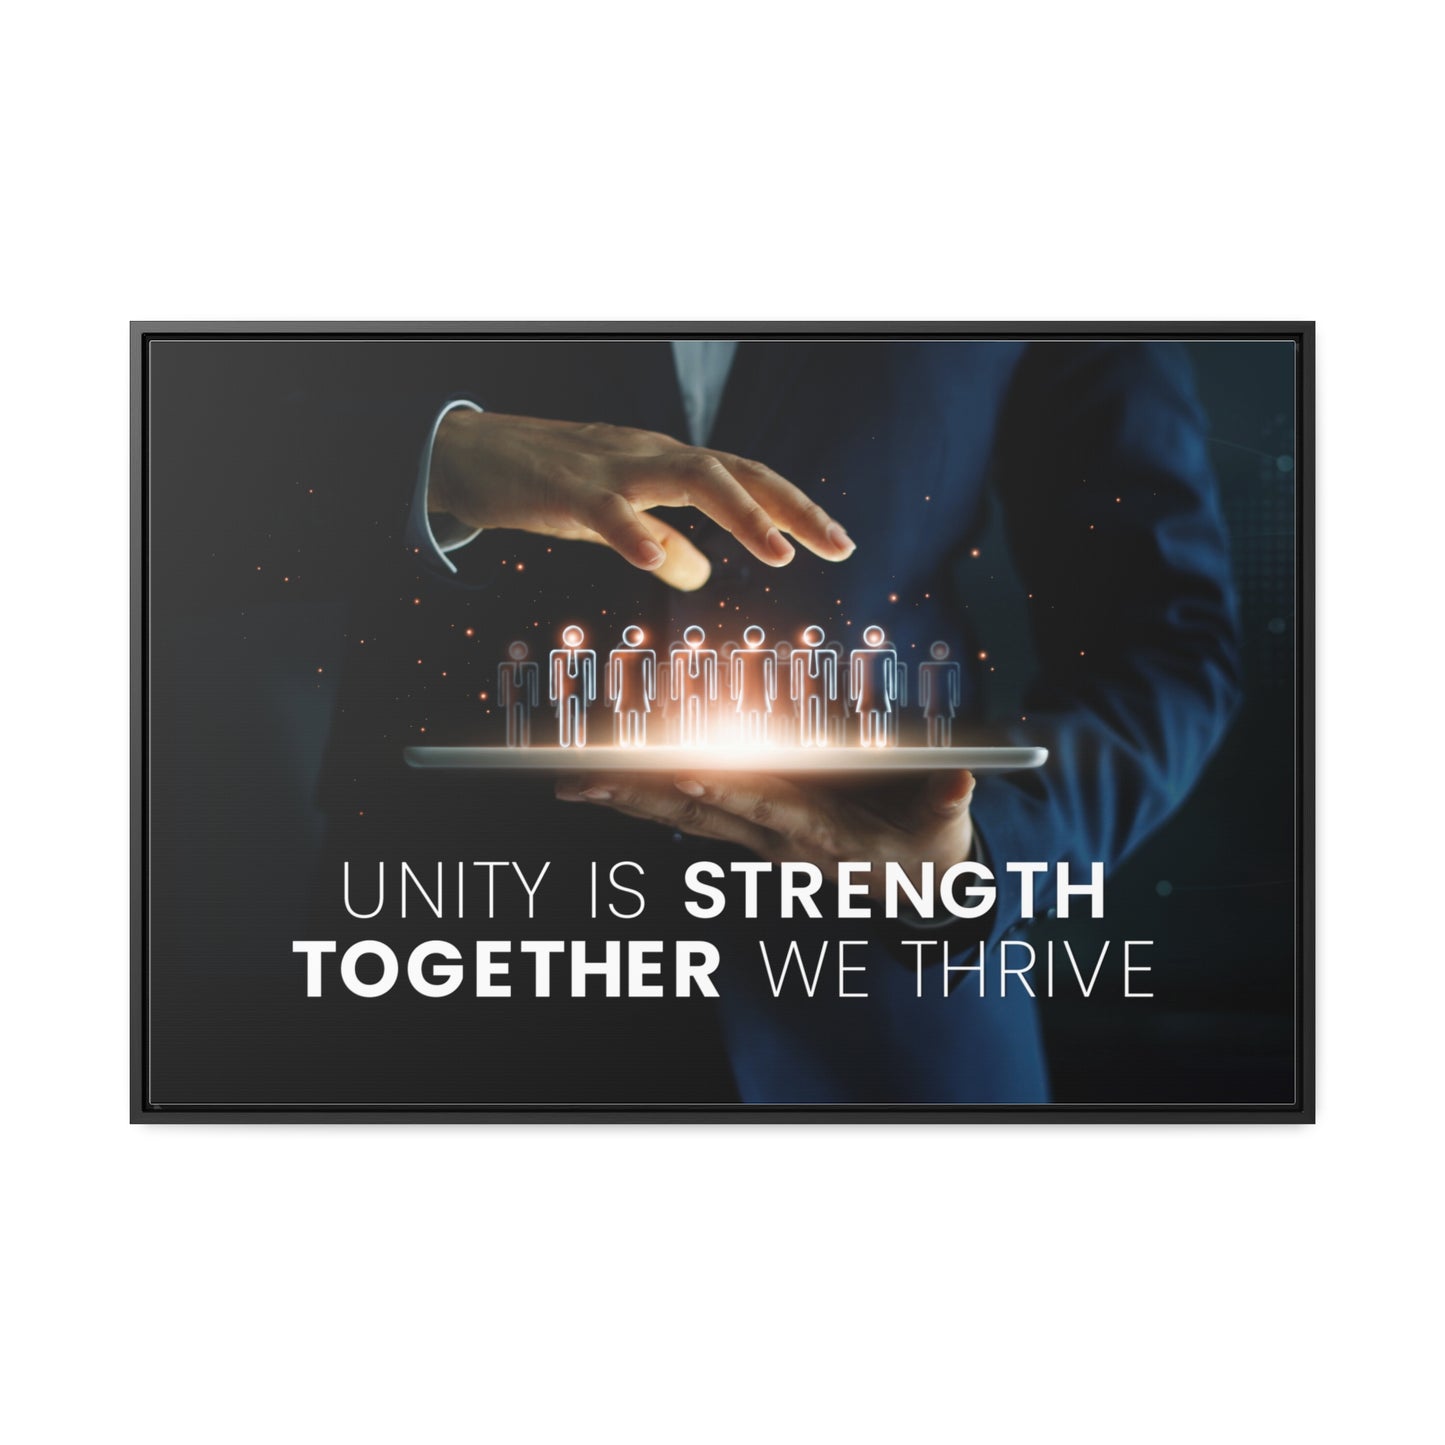 Unity is Strength Together we Thrive Wall Art